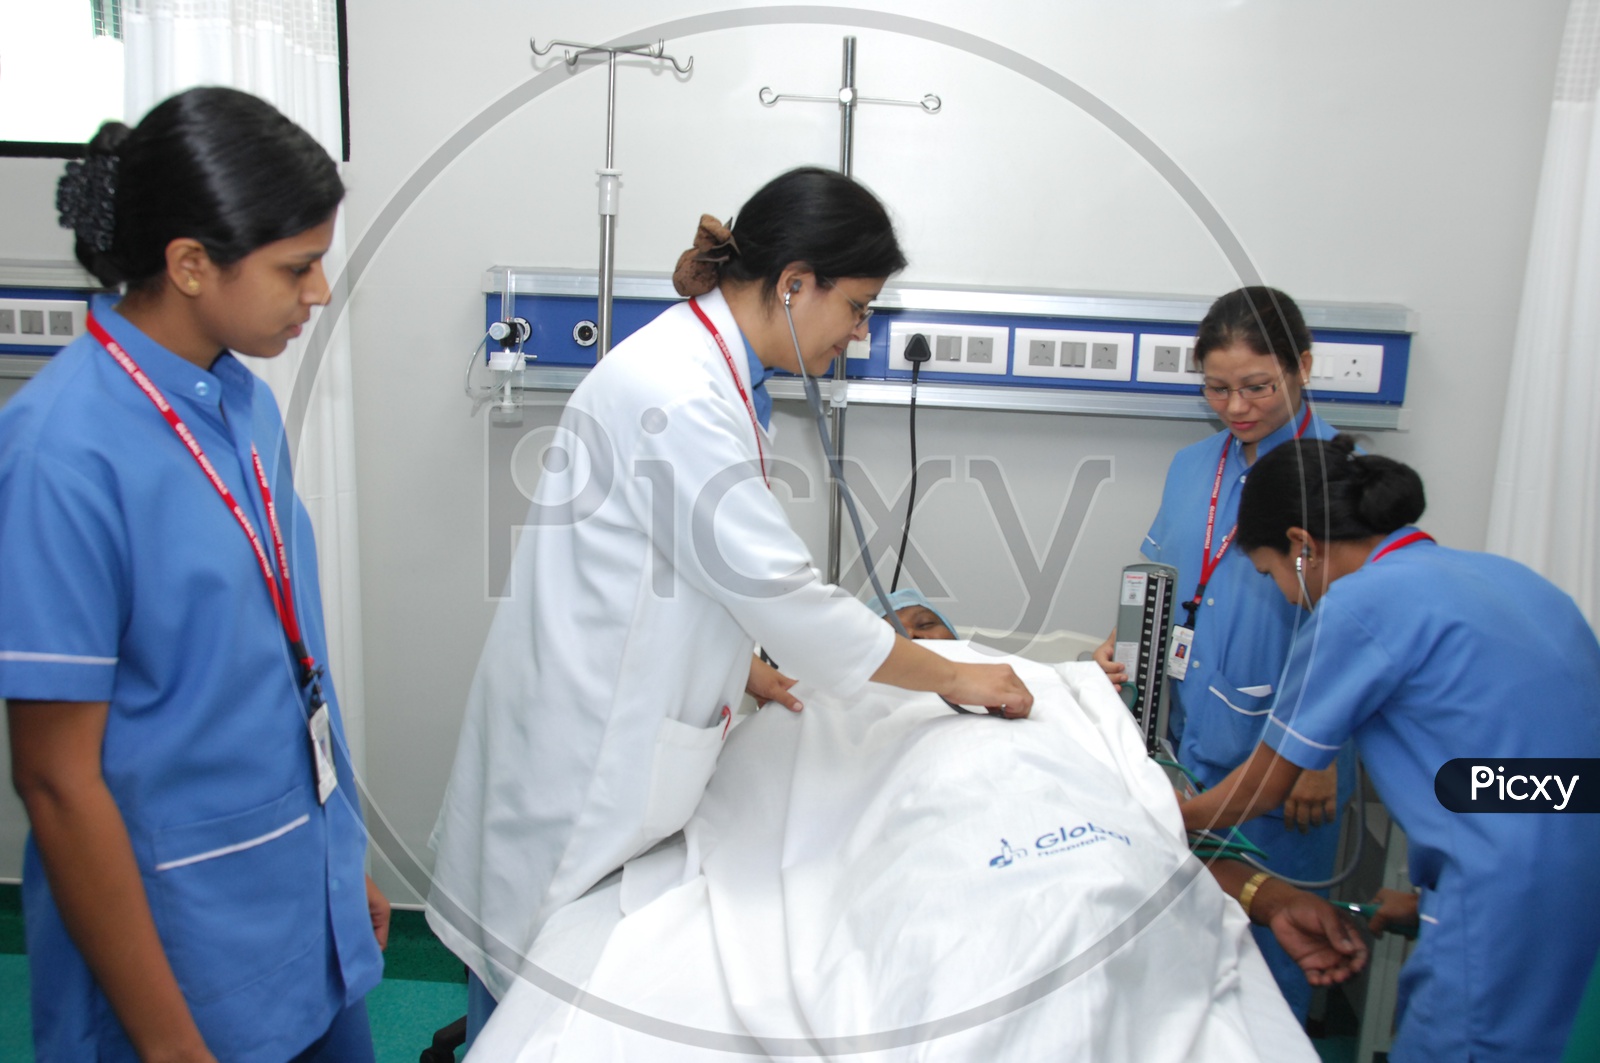 Doctors Checking Patient In a Hospital ICU